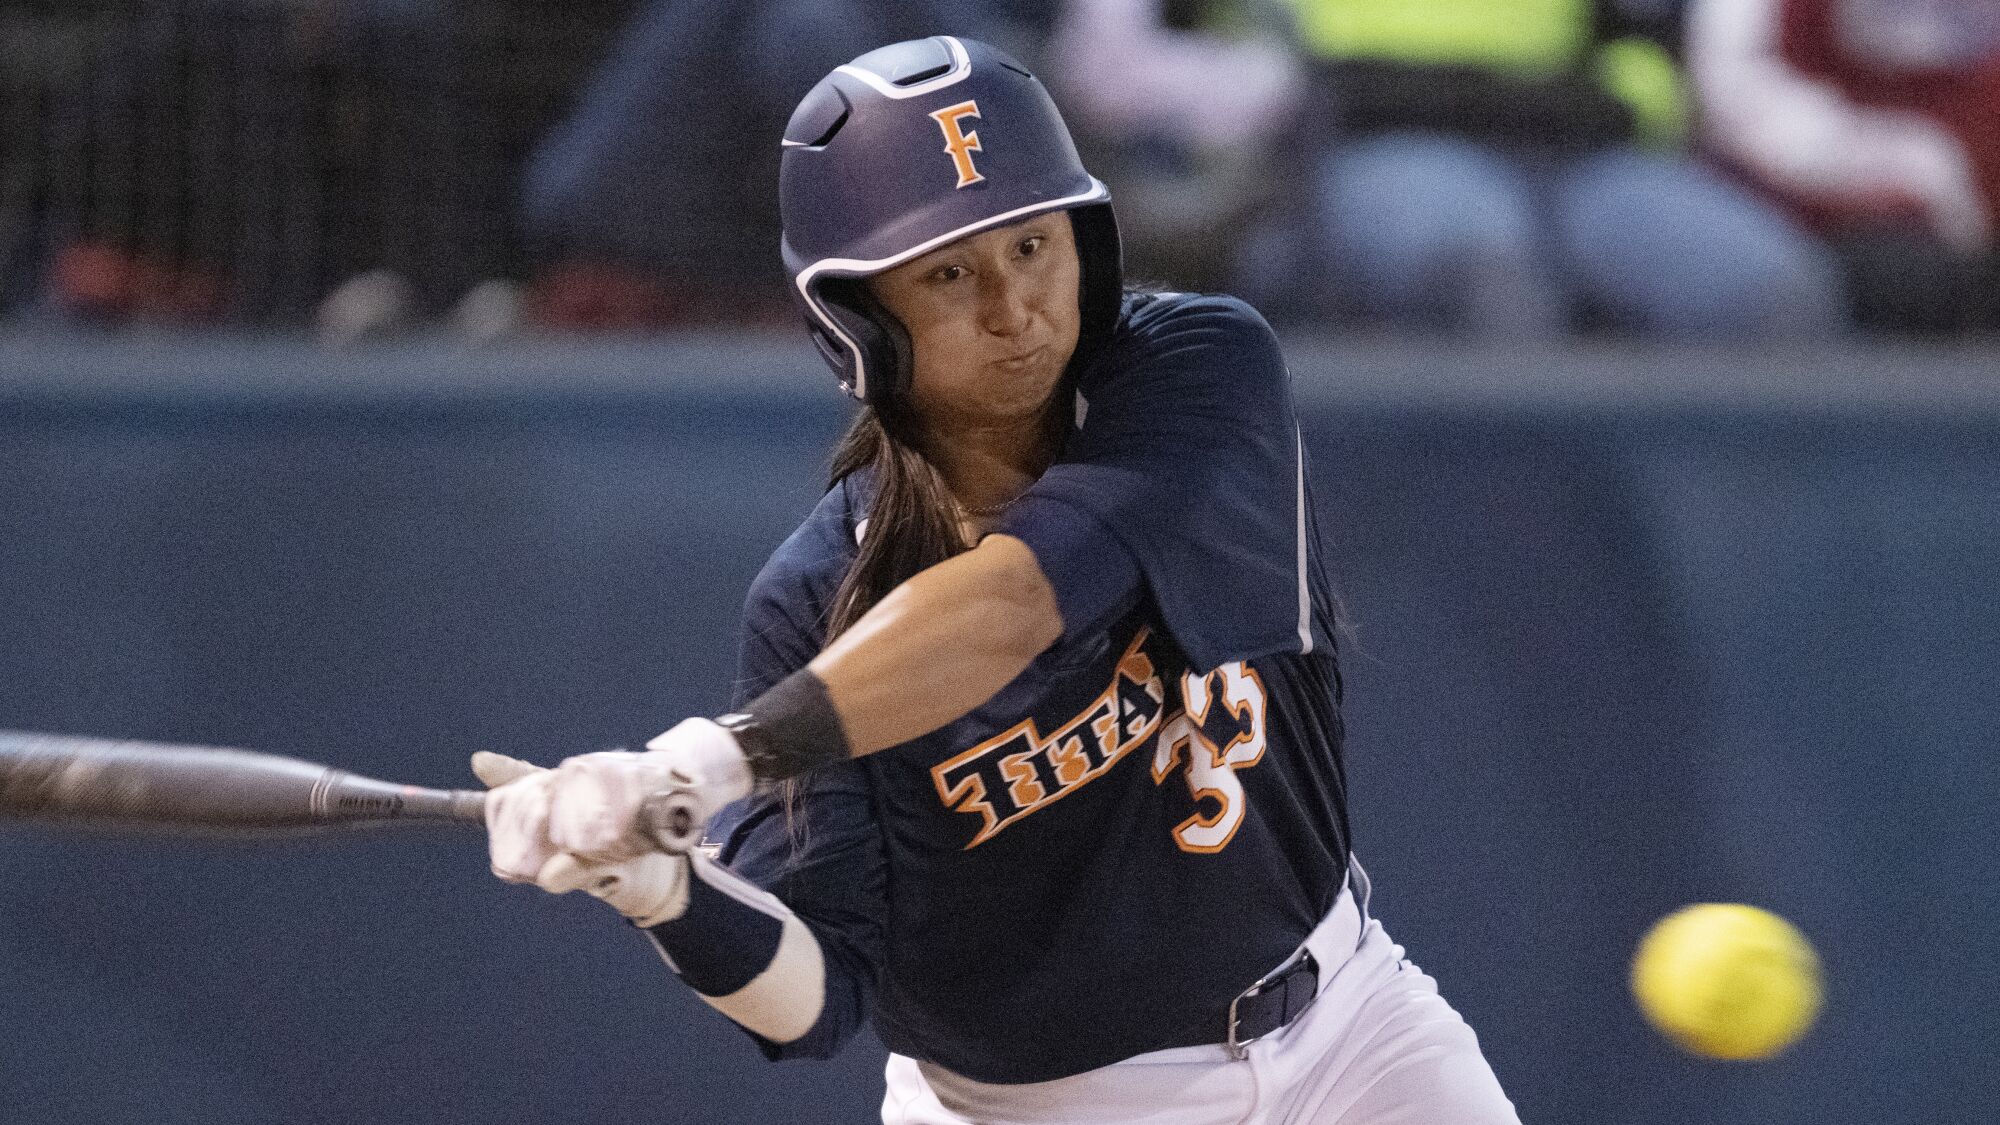 Cal State Fullerton's Kelsie Whitmore bats during a 2020 softball game